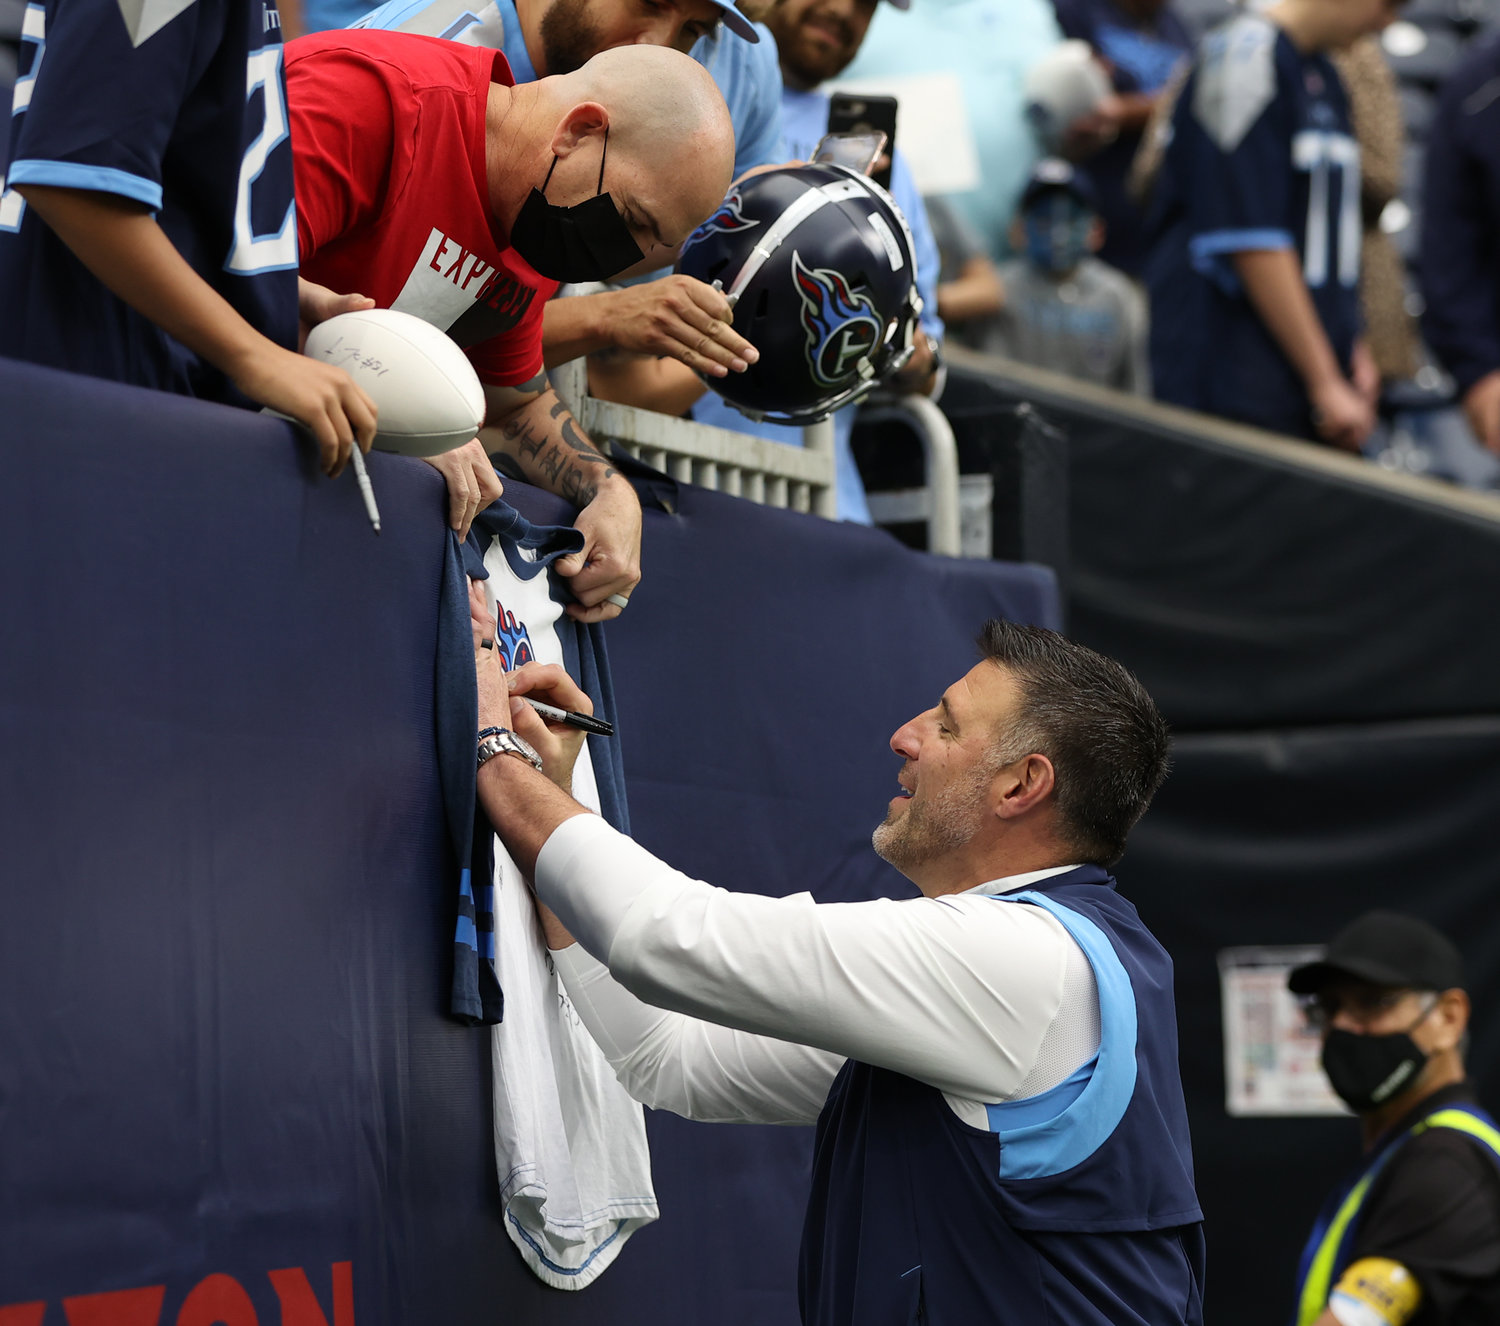 Tennessee Titans head coach Mike Vrabel autographs a shirt for a Titans fan before an NFL game between the Texans and the Titans on Jan. 9, 2022 in Houston, Texas. The Titans won, 28-25.